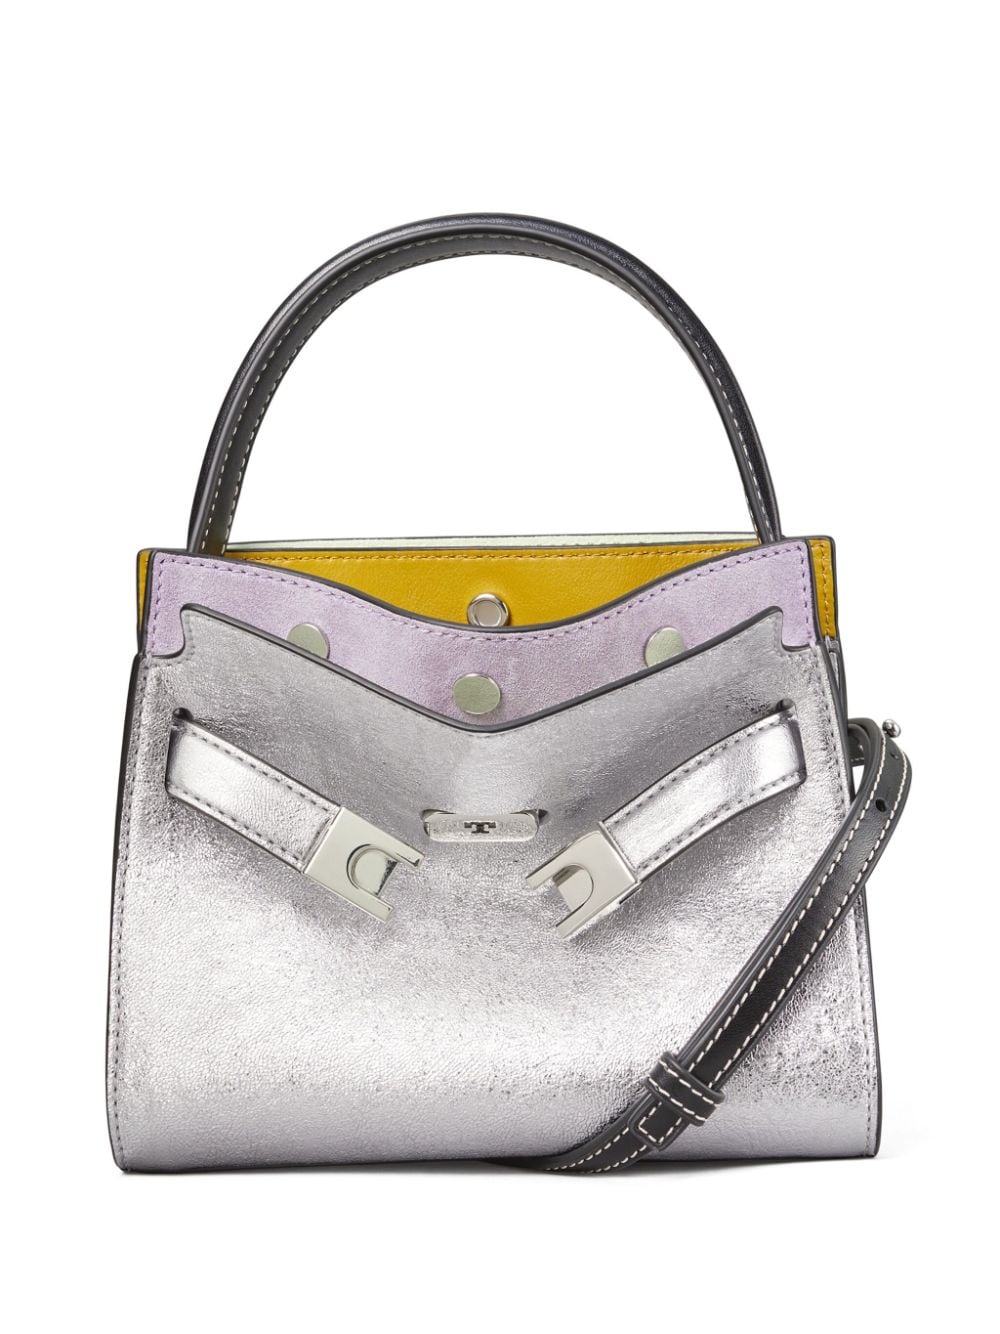 Tory Burch Lee Radziwill Petite Double Leather Tote Bag In Silver